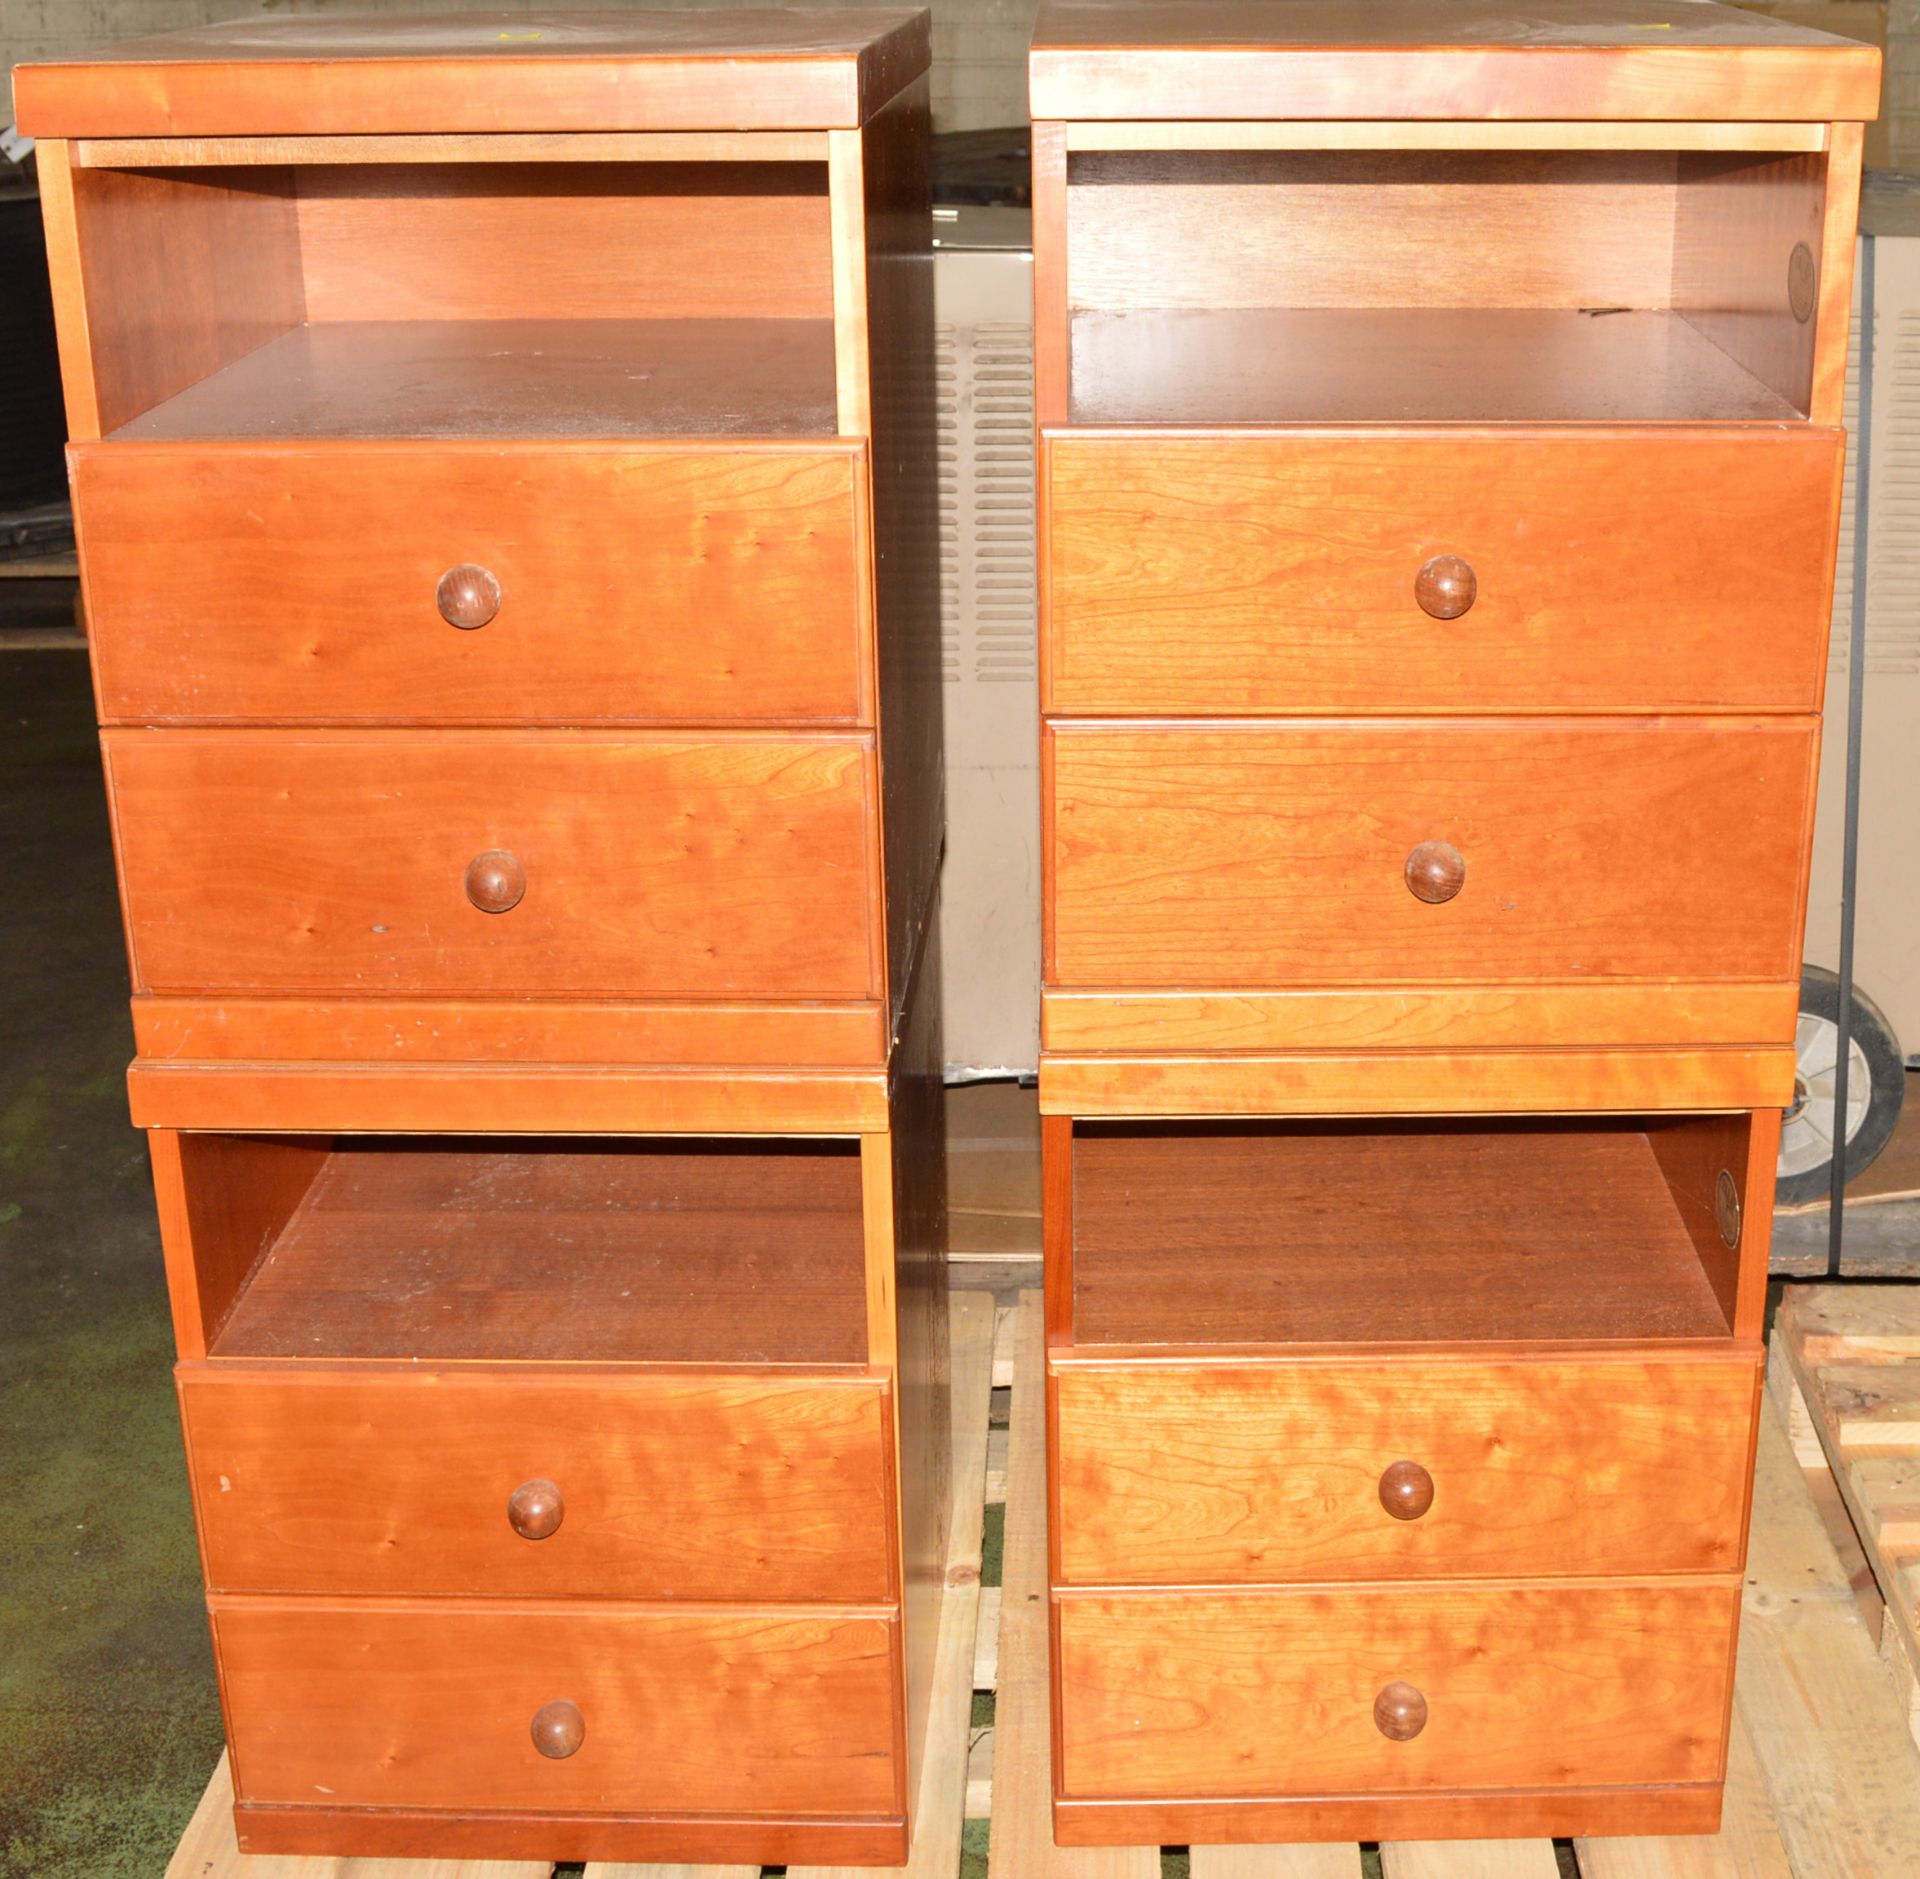 4x Bedside Cabinets - Cherry.